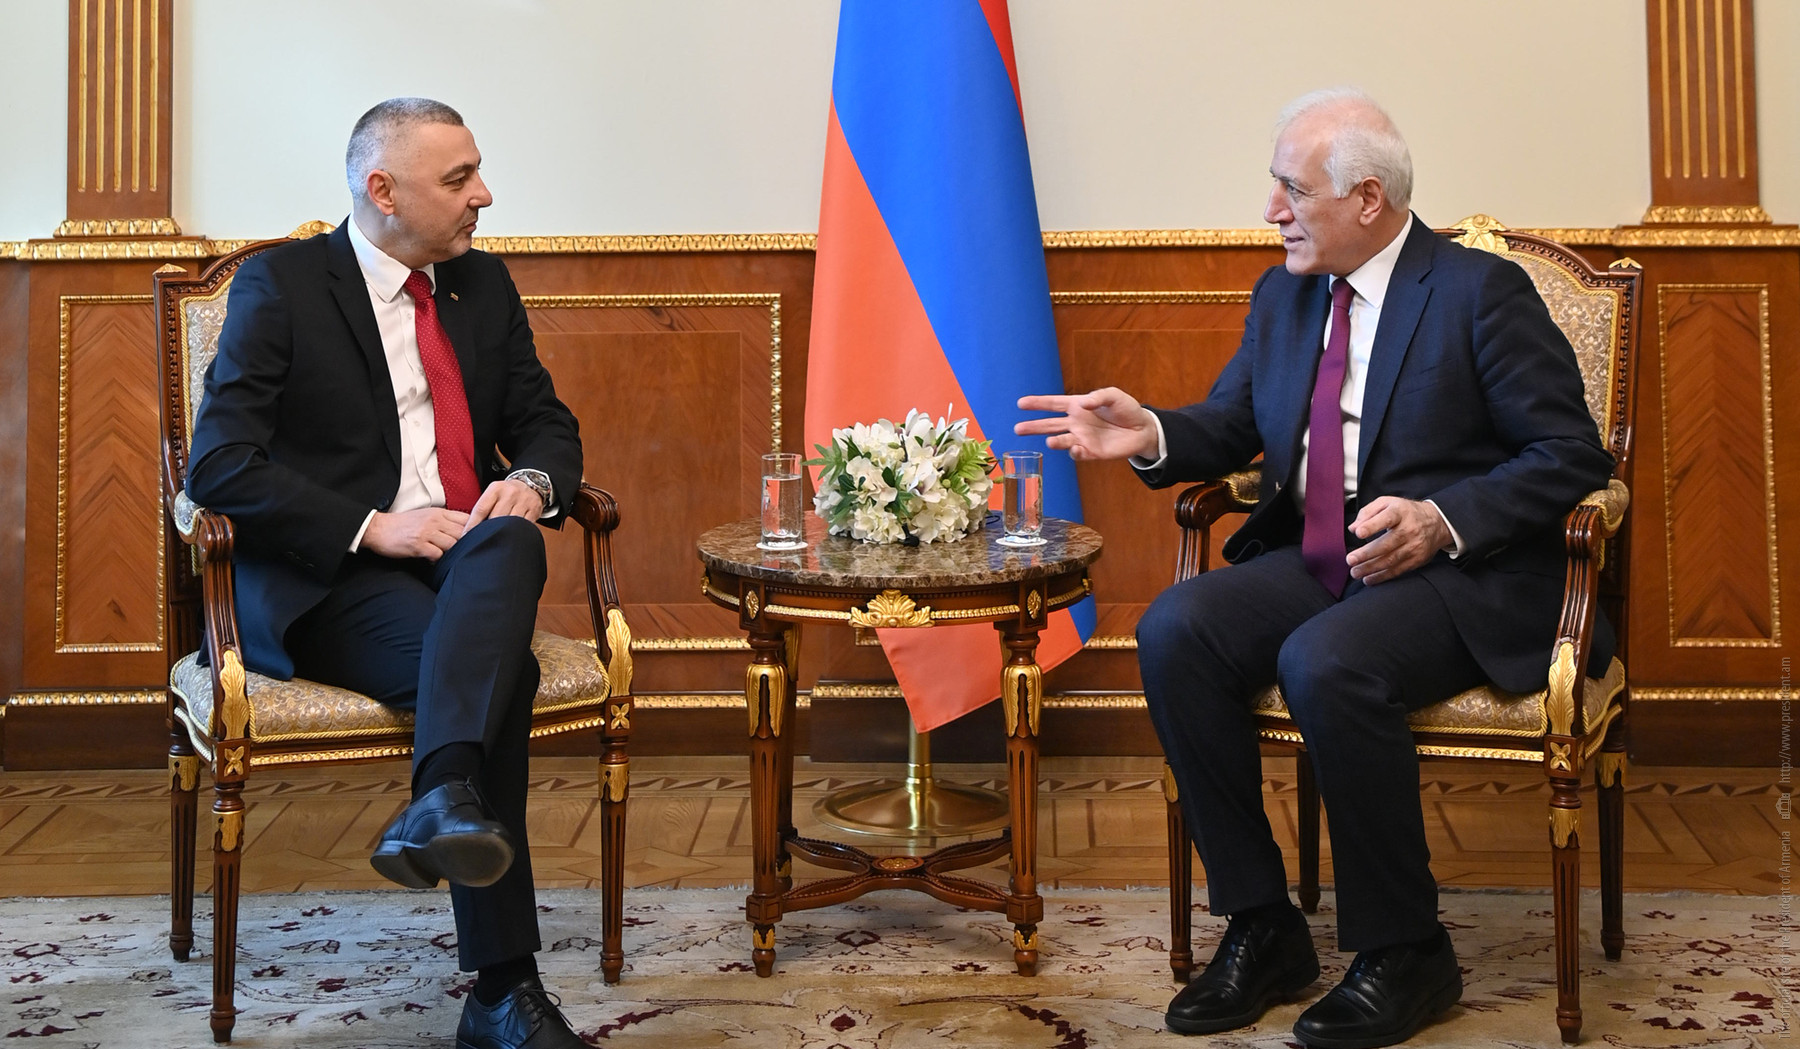 President of the Republic received the Ambassador of Bulgaria